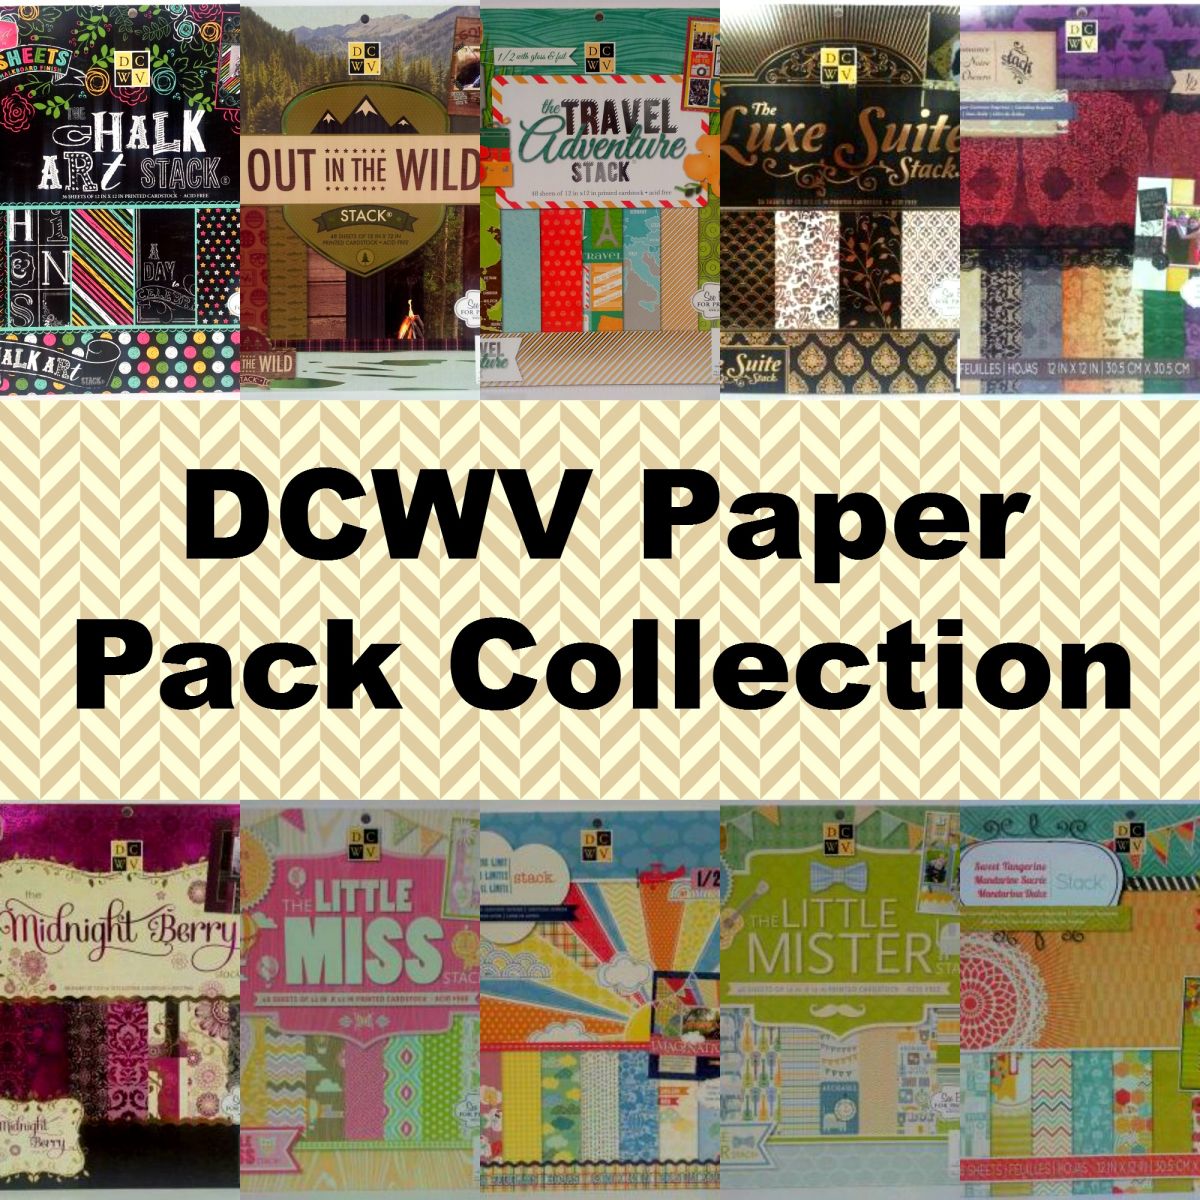 DCWV Paper Pack Collection